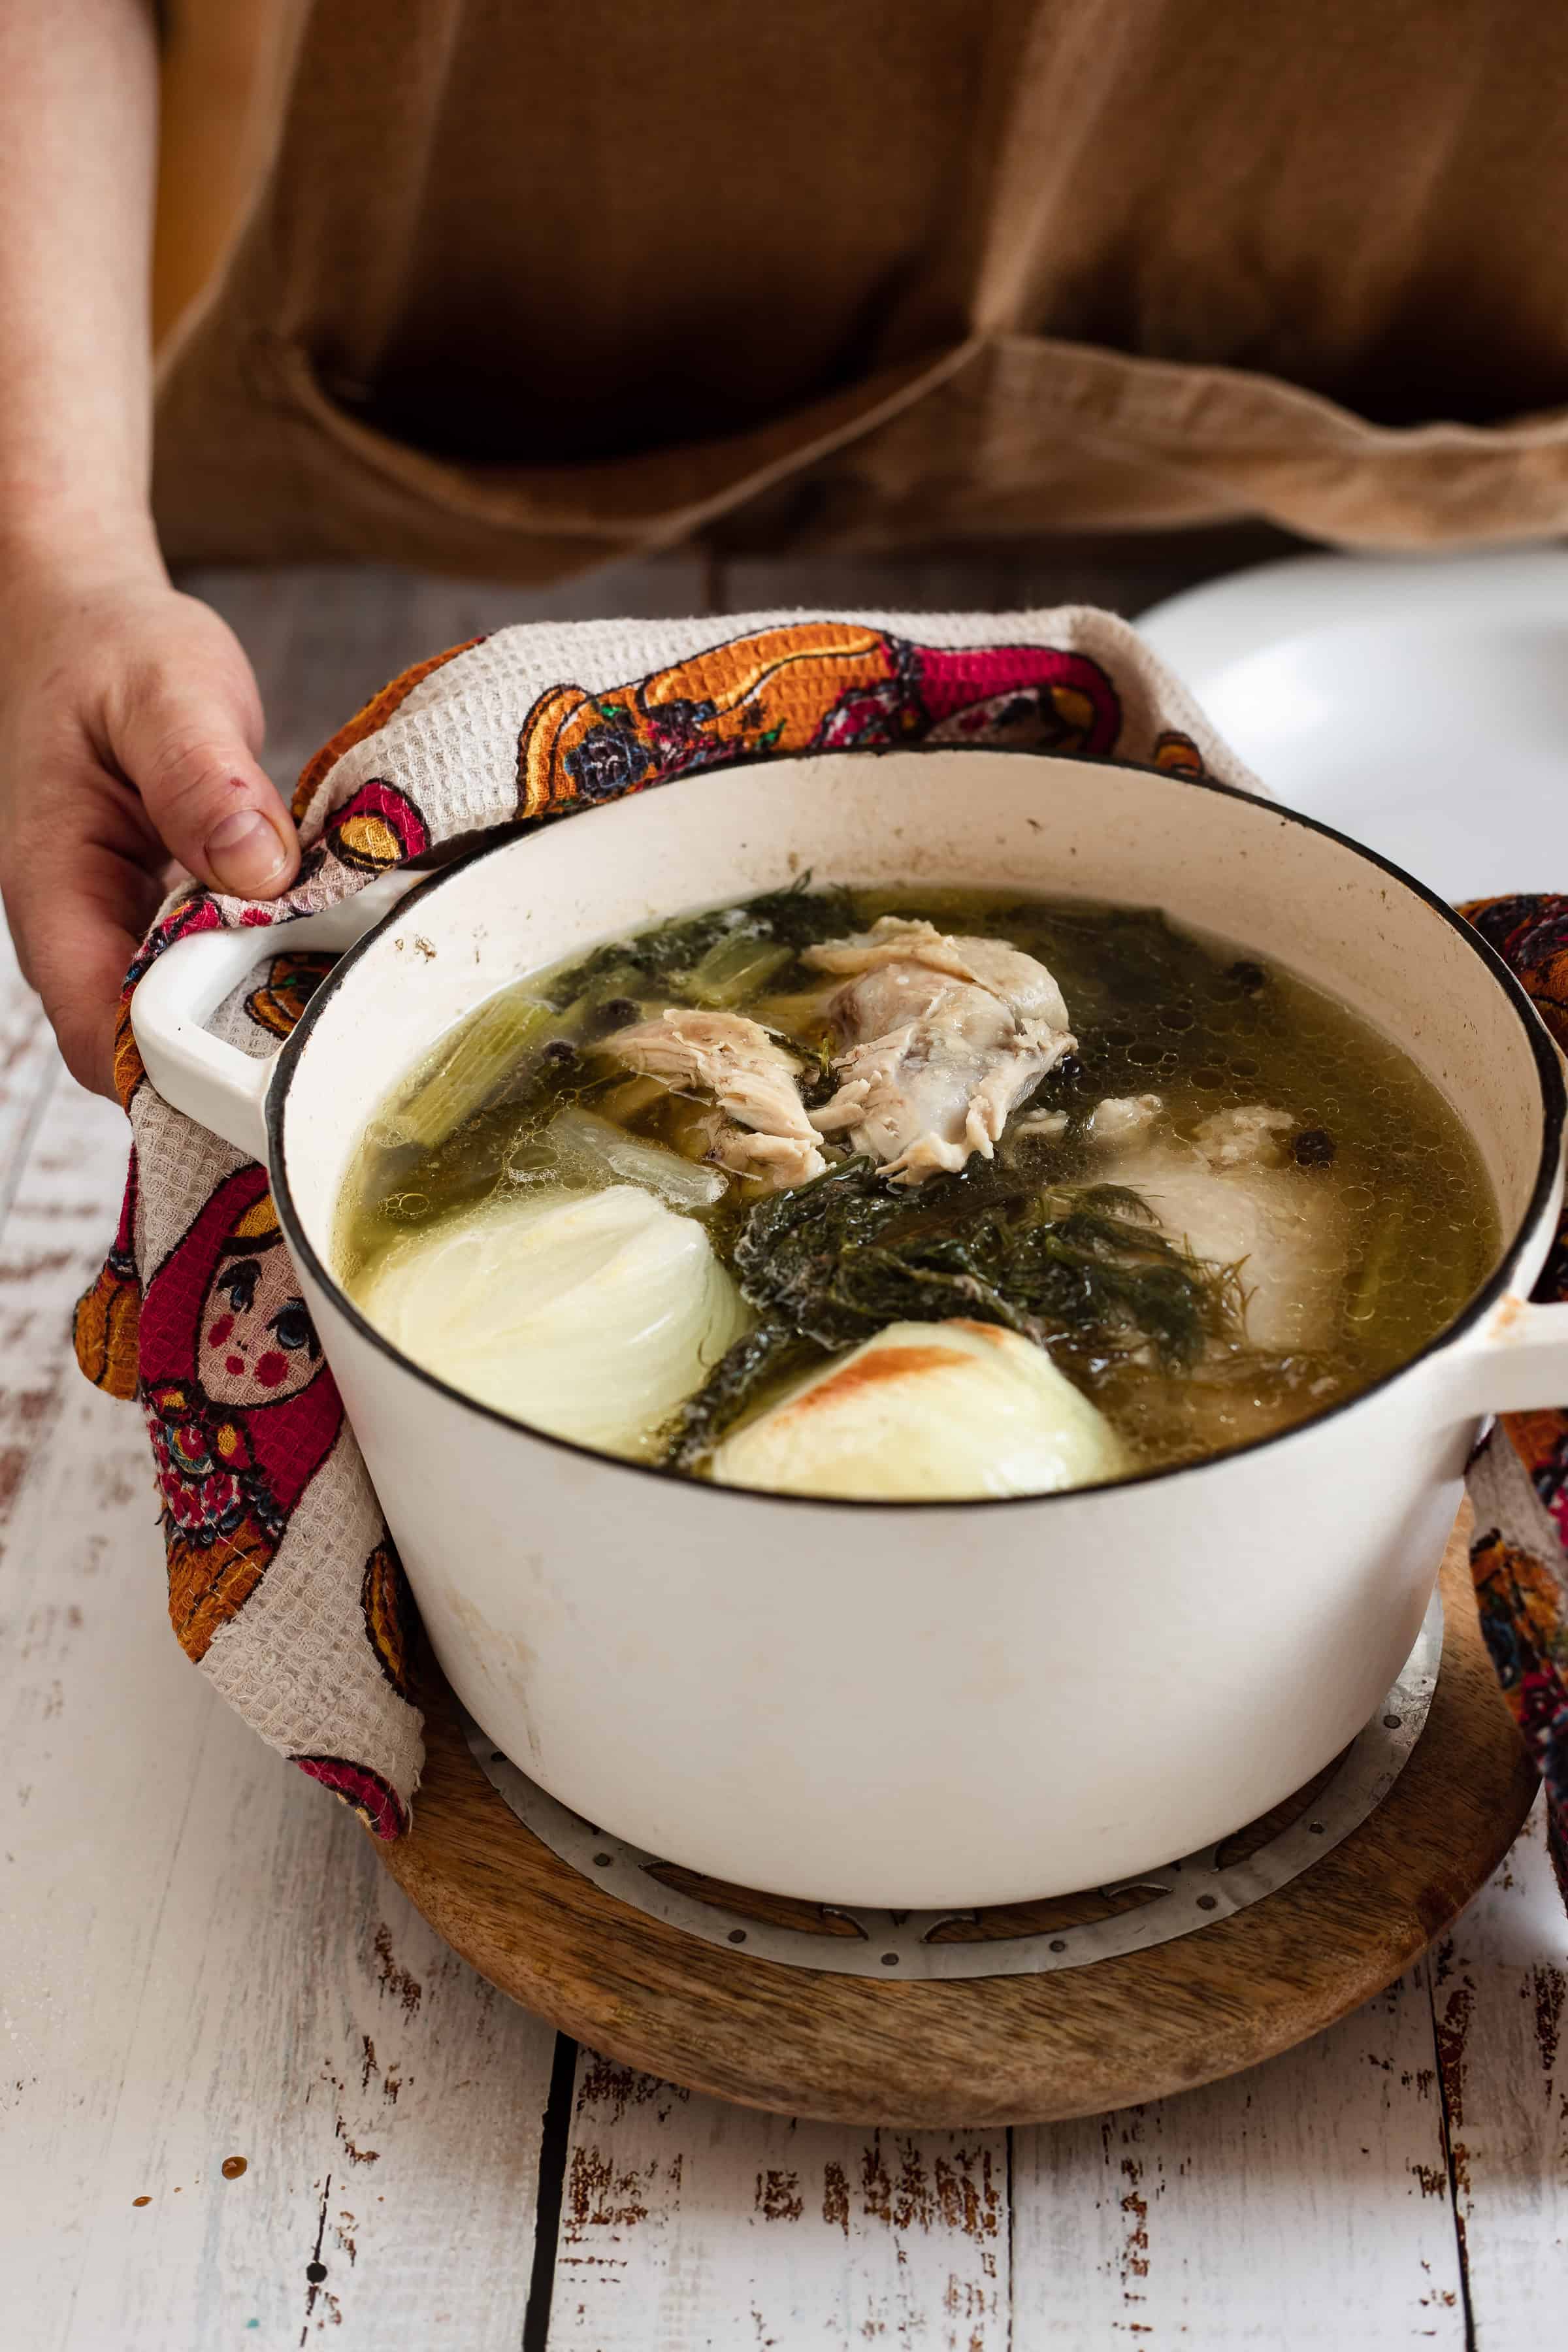 A person's hand holds a colorful cloth next to a white pot filled with chicken soup, featuring onions, greens, and visible broth, on a wooden trivet.